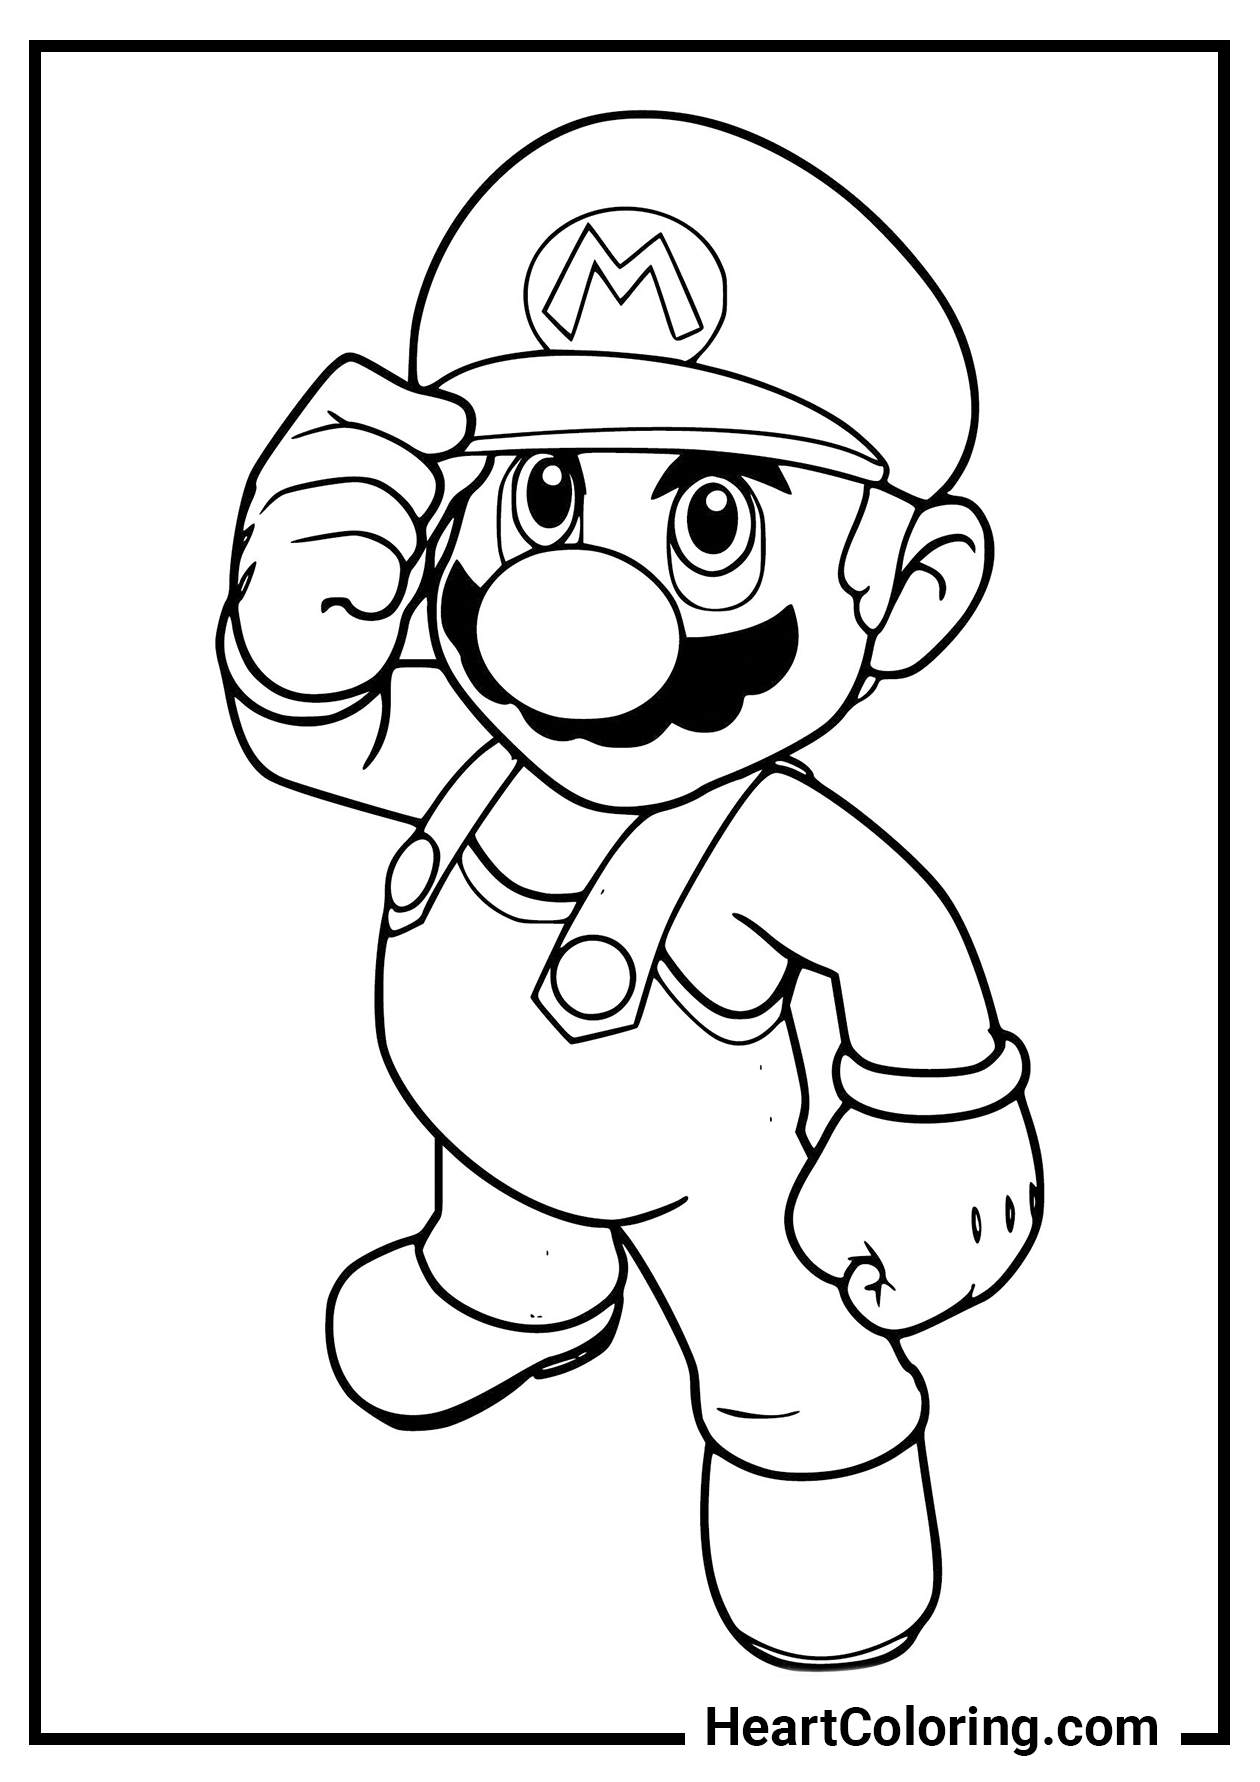 Super mario free coloring pages pdf printable